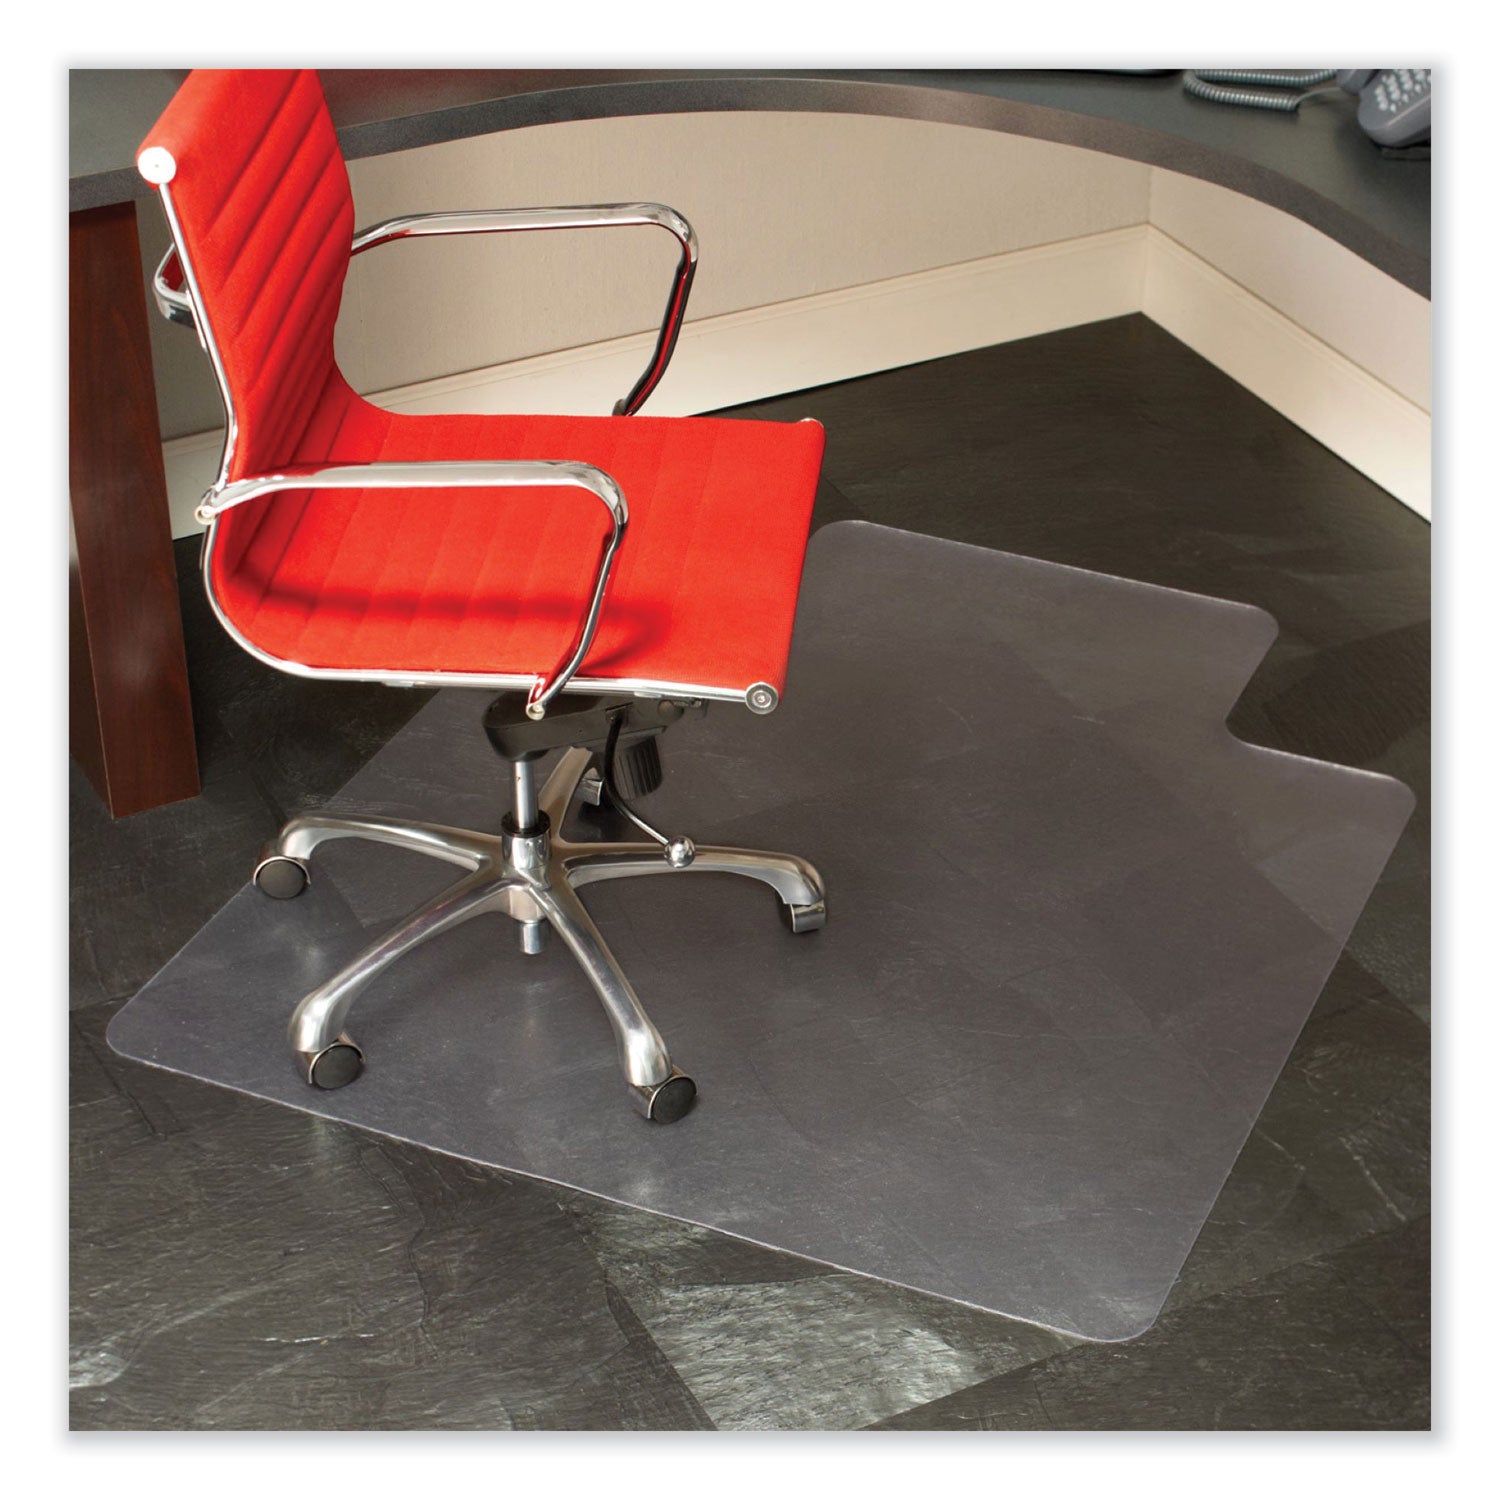 everlife-textured-chair-mat-for-hard-floors-with-lip-36-x-48-clear-ships-in-4-6-business-days_esr132033 - 4